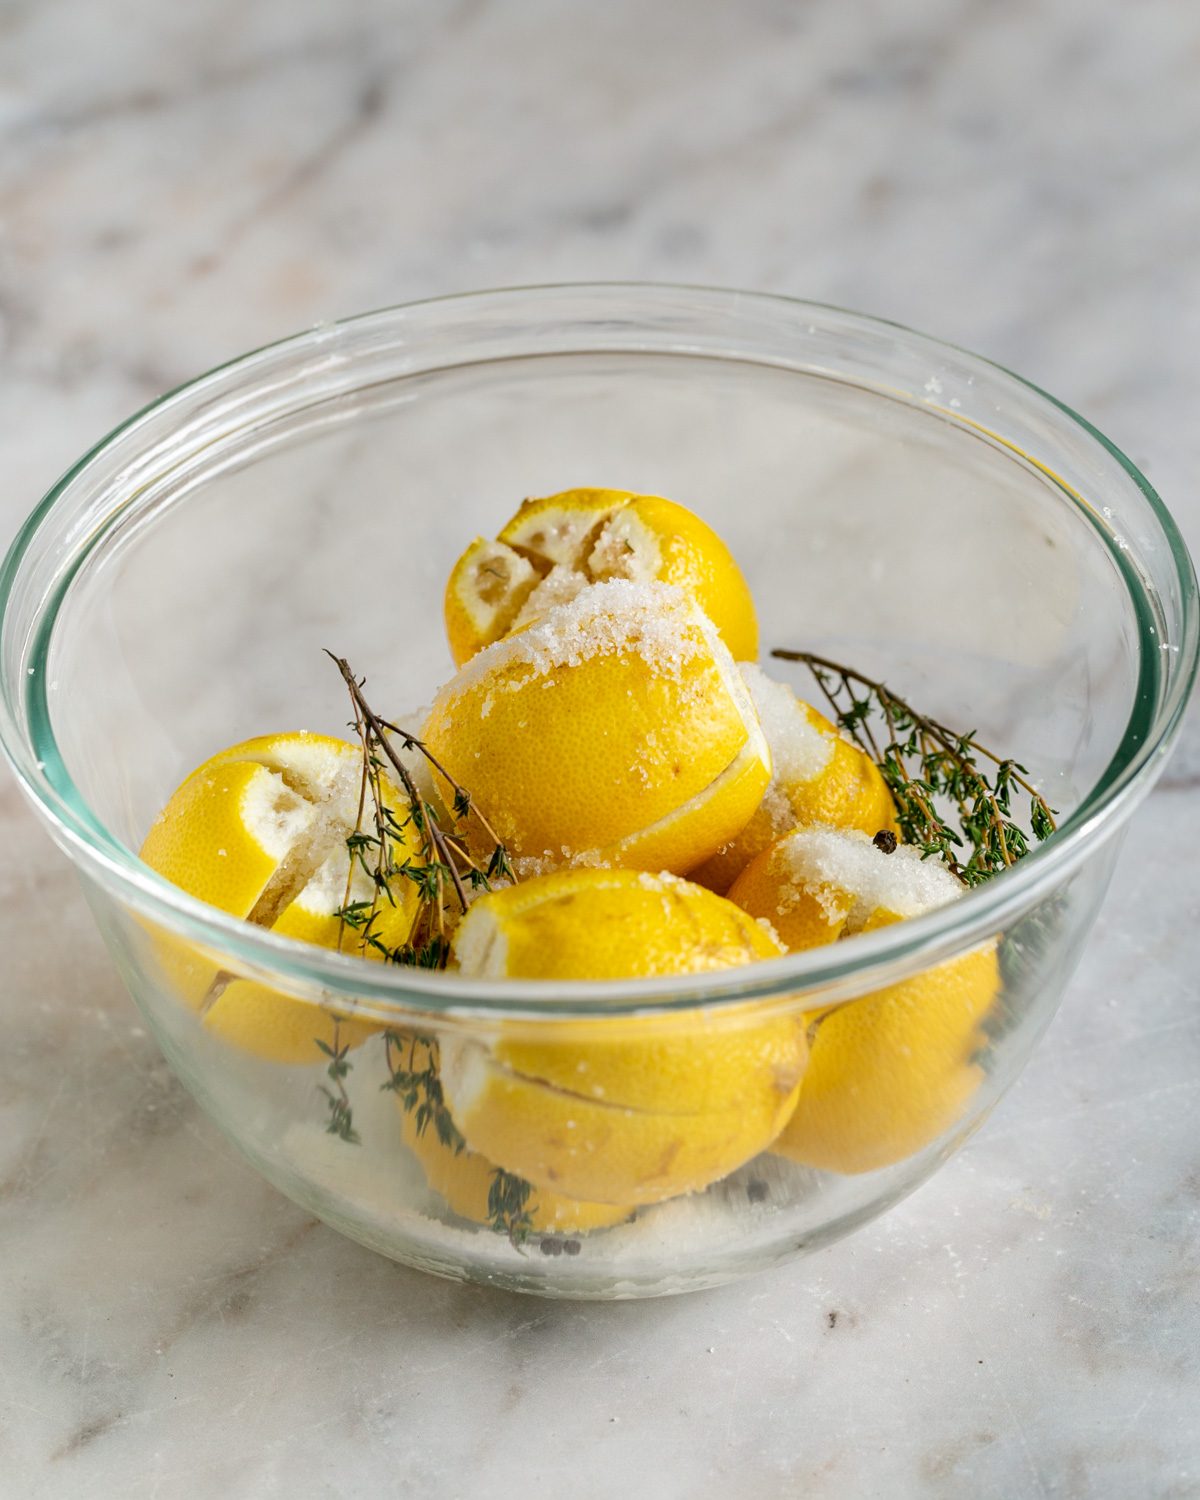 Lemons with salt and sugar mixture in a bowl